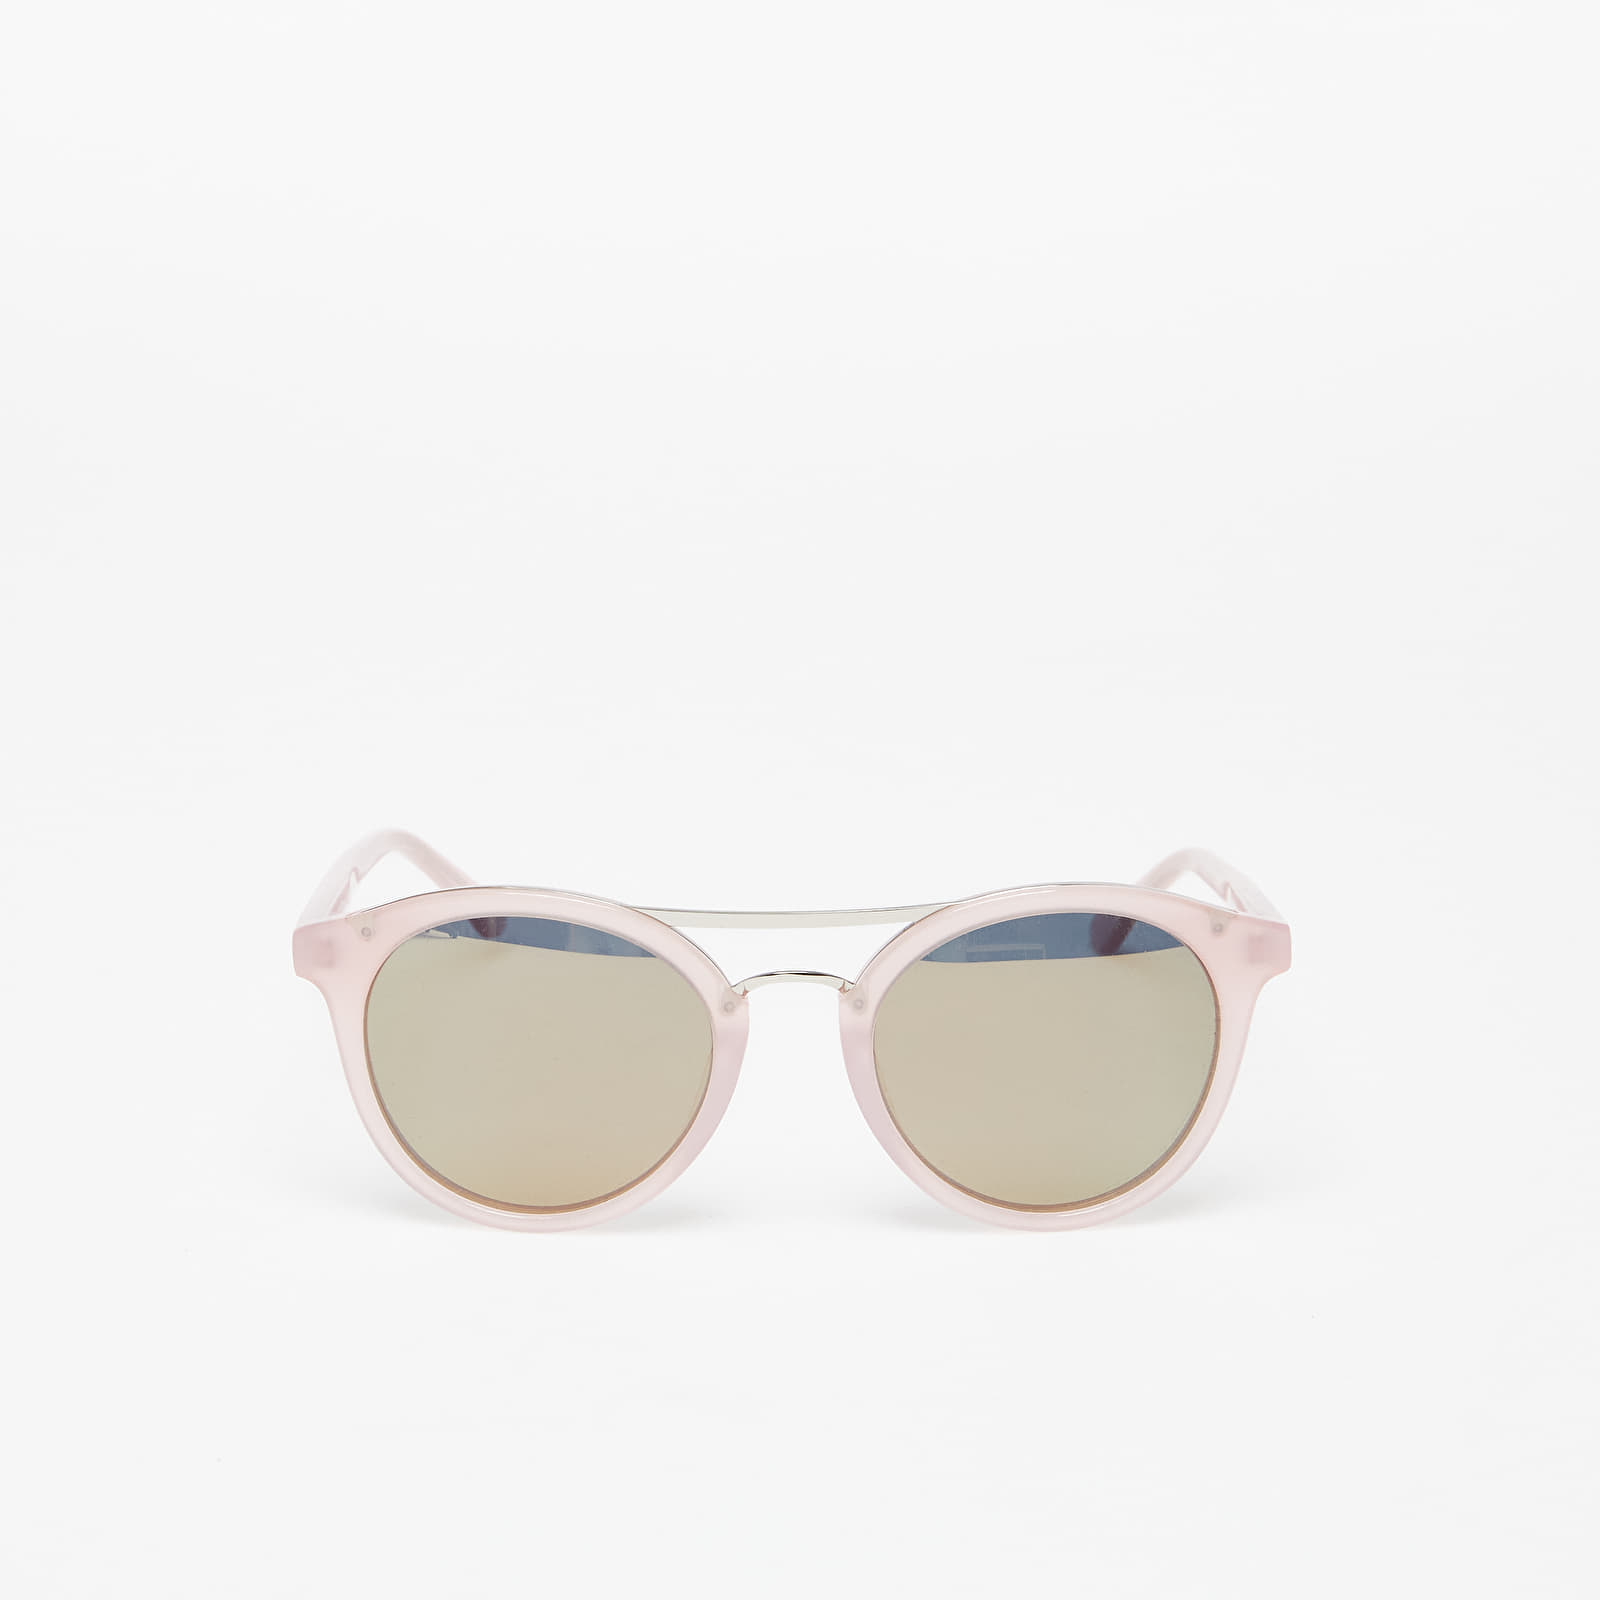 Zonnebrillen Horsefeathers Nomad Sunglasses Gloss Rose/Mirror Champagne